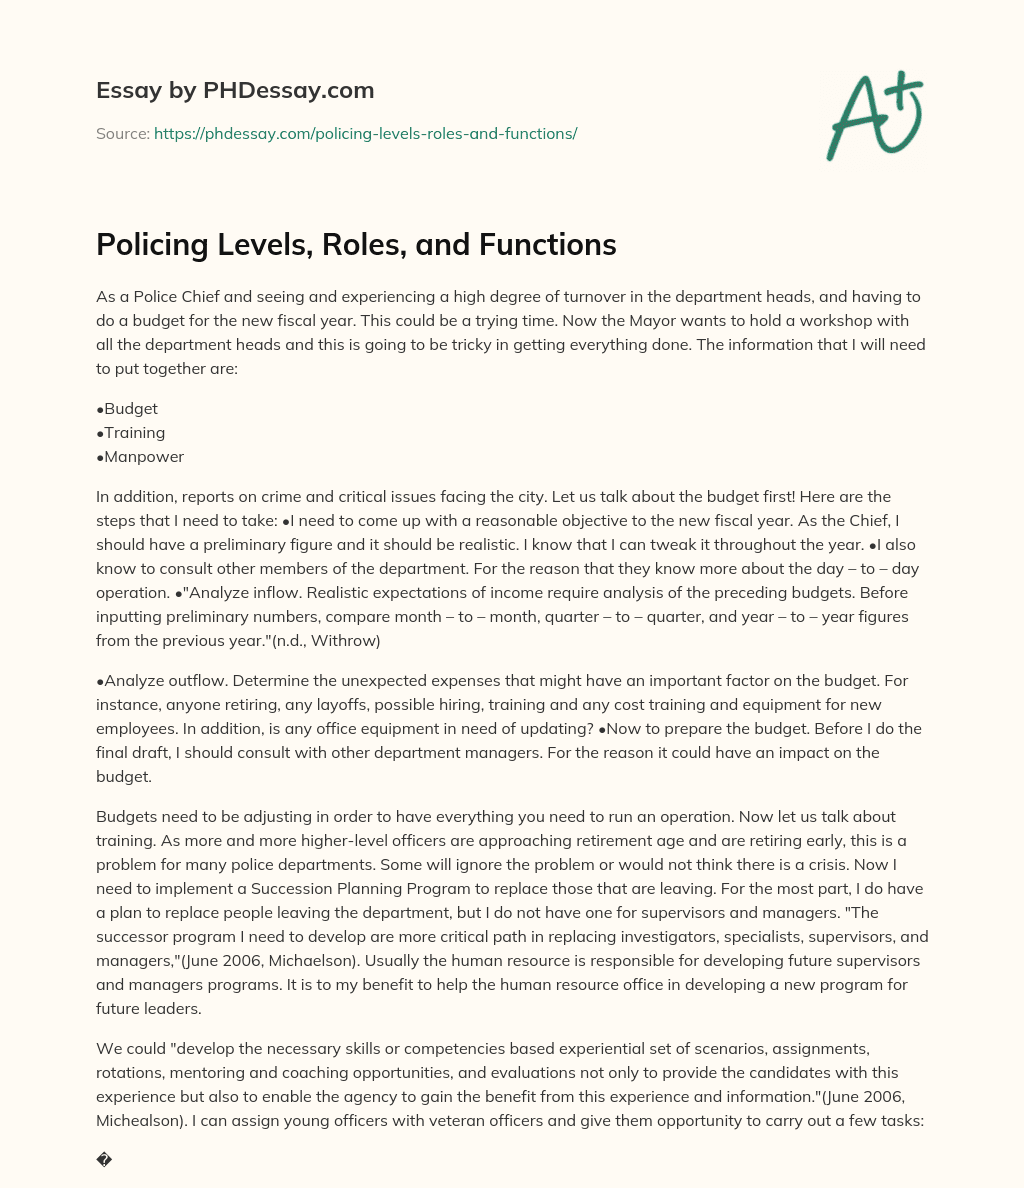 Policing Levels, Roles, and Functions essay